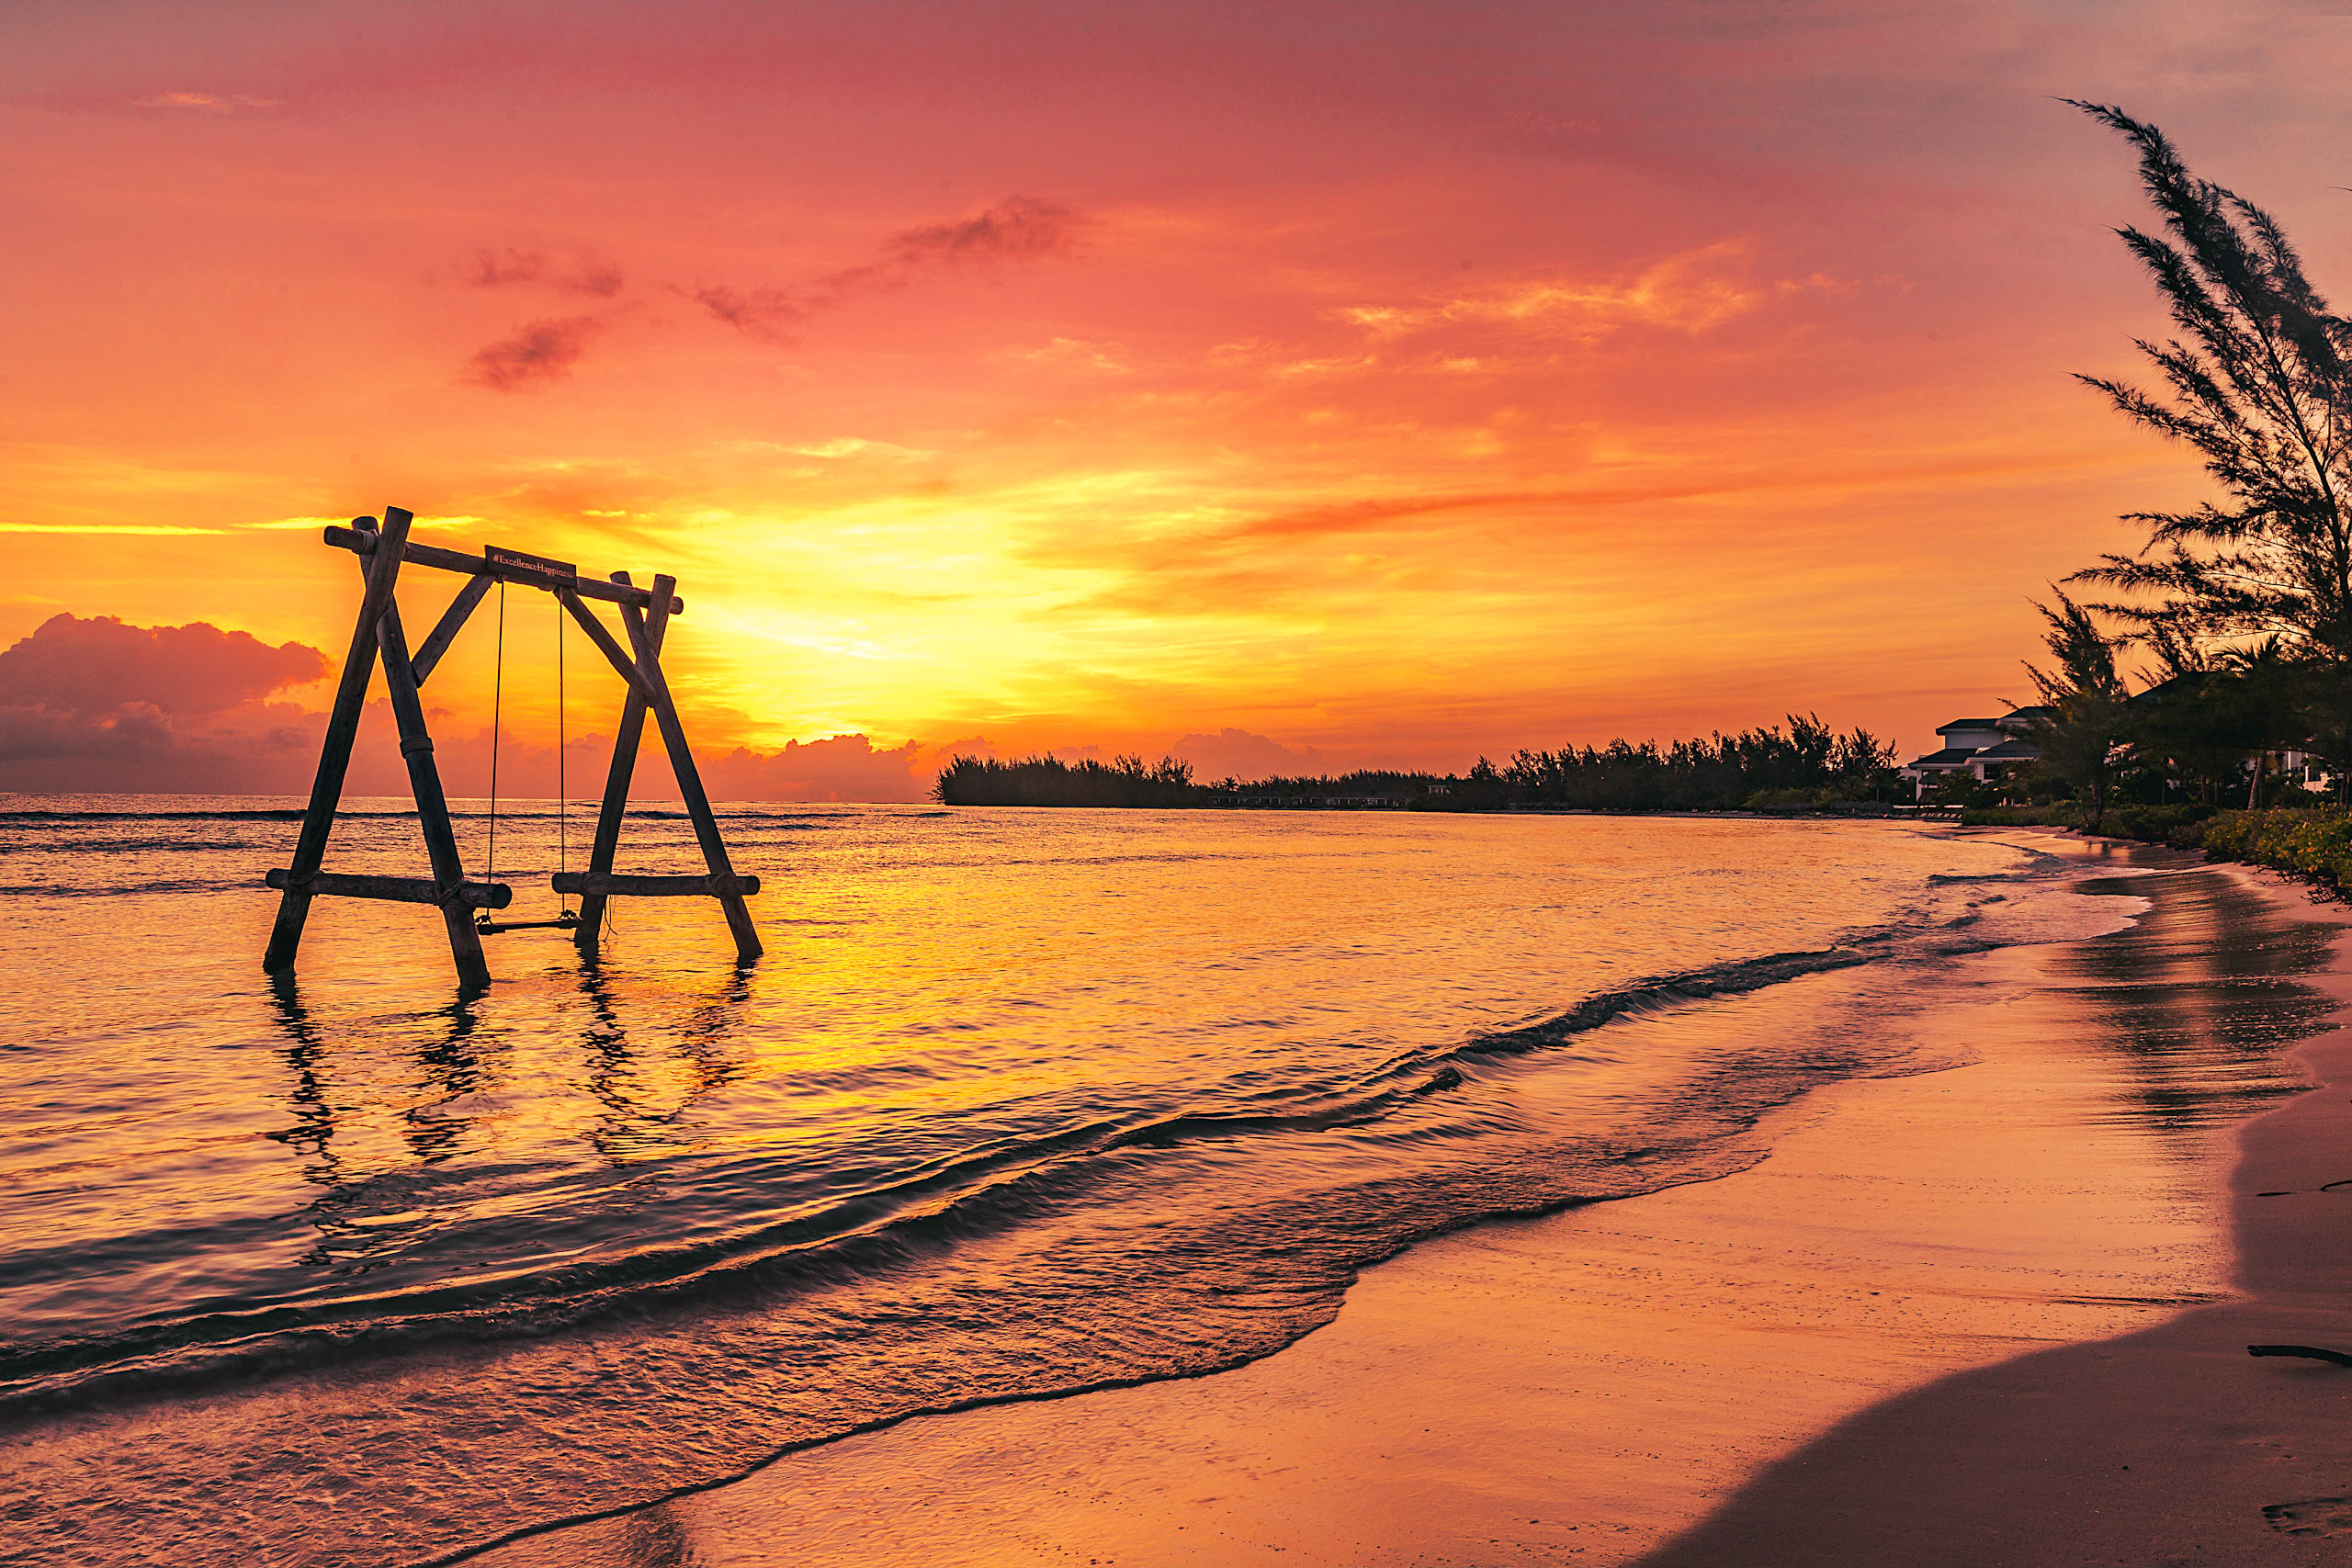 Jamaican beach at sunrise with a swing in the water